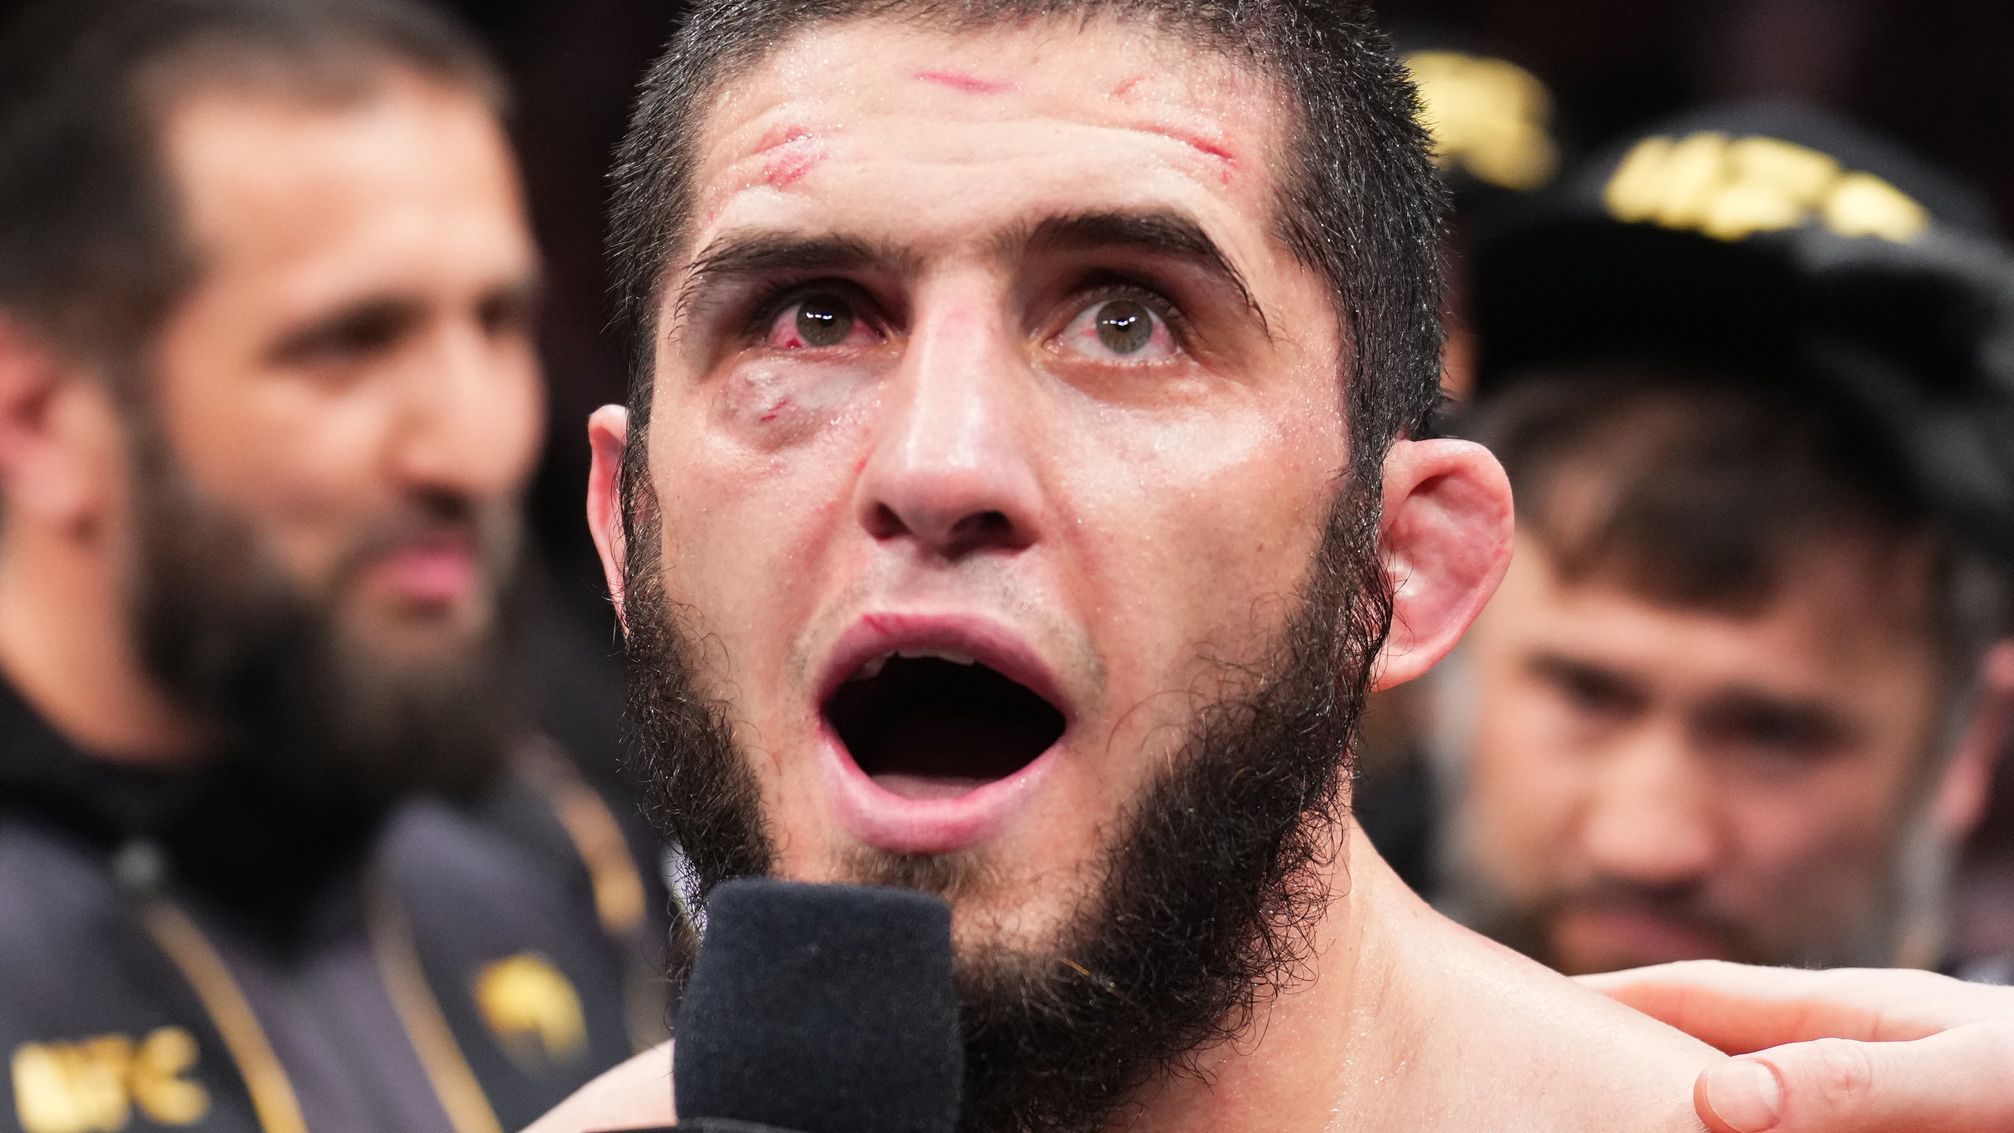 Islam Makhachev of Russia reacts after his victory over Alexander Volkanovski of Australia in Perth. (Photo by Chris Unger/Zuffa LLC)